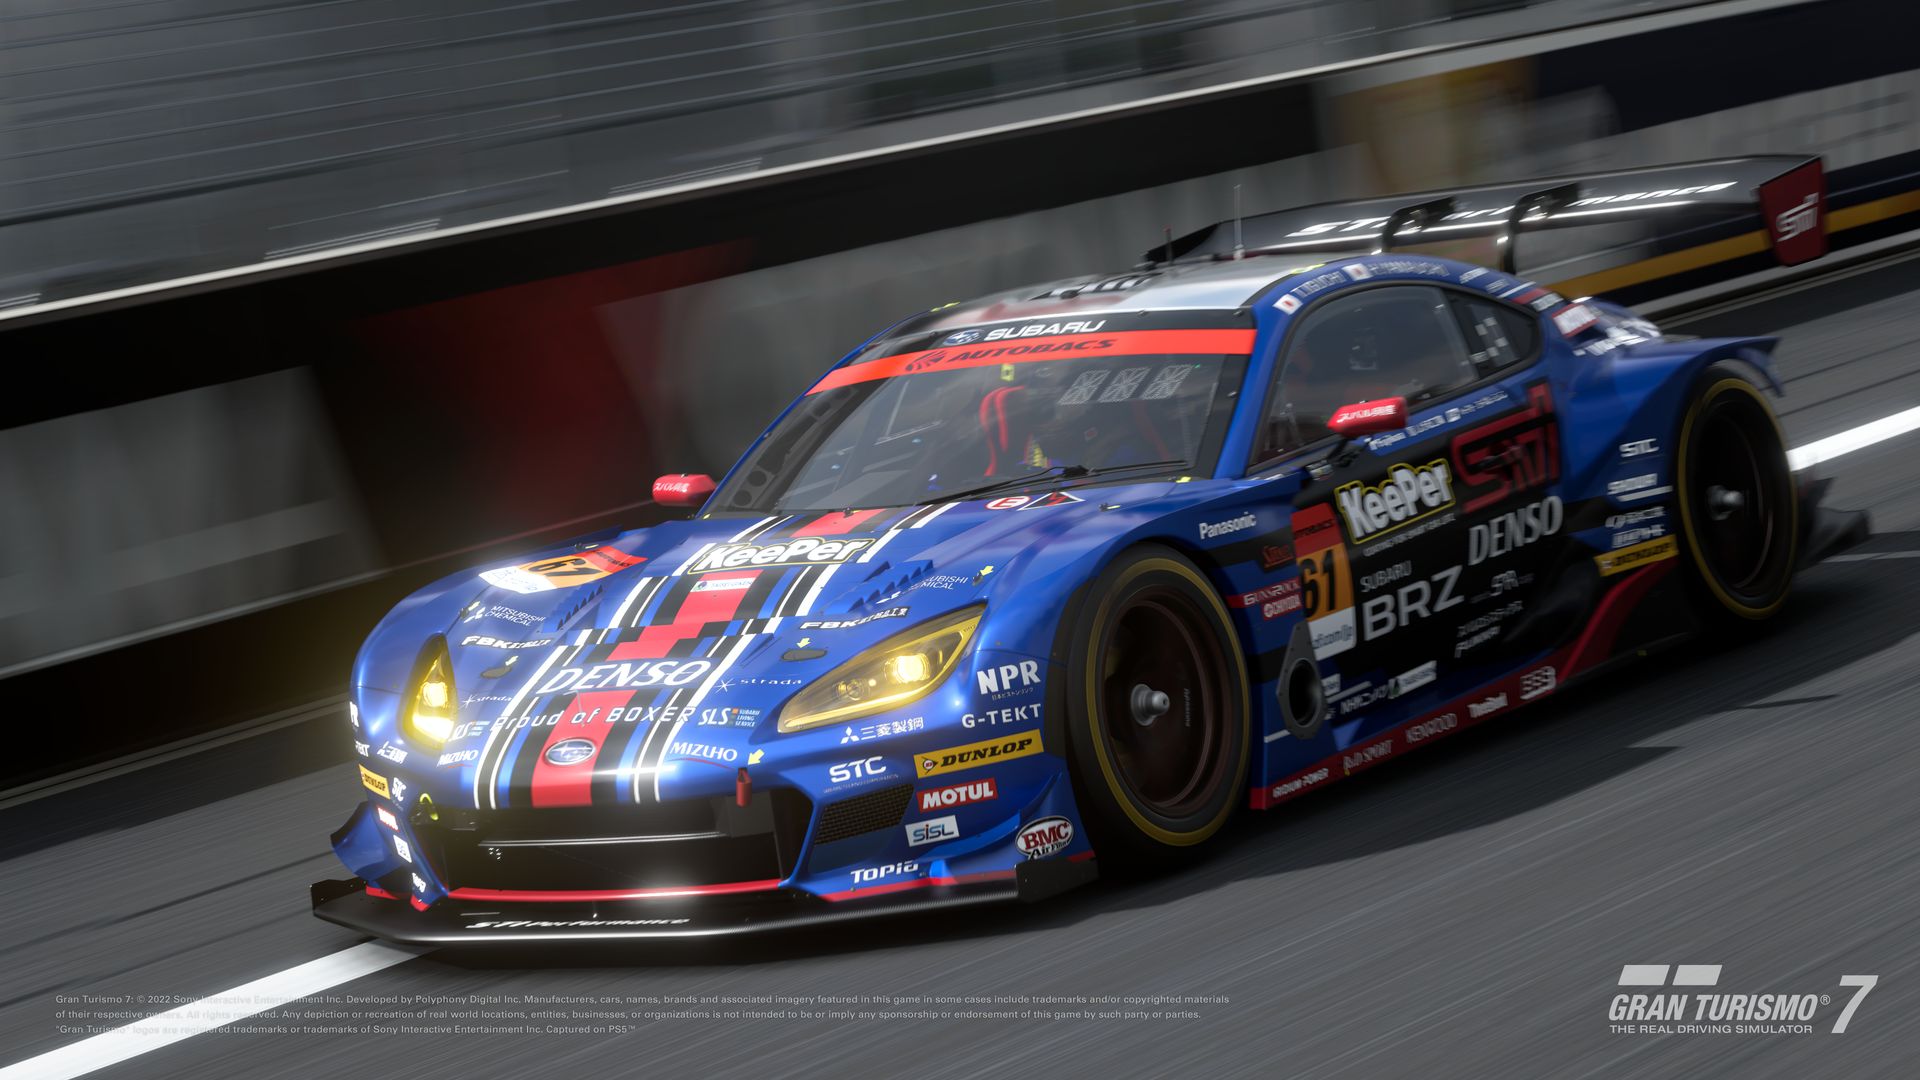 #
      Gran Turismo 7 version 1.13 update now available